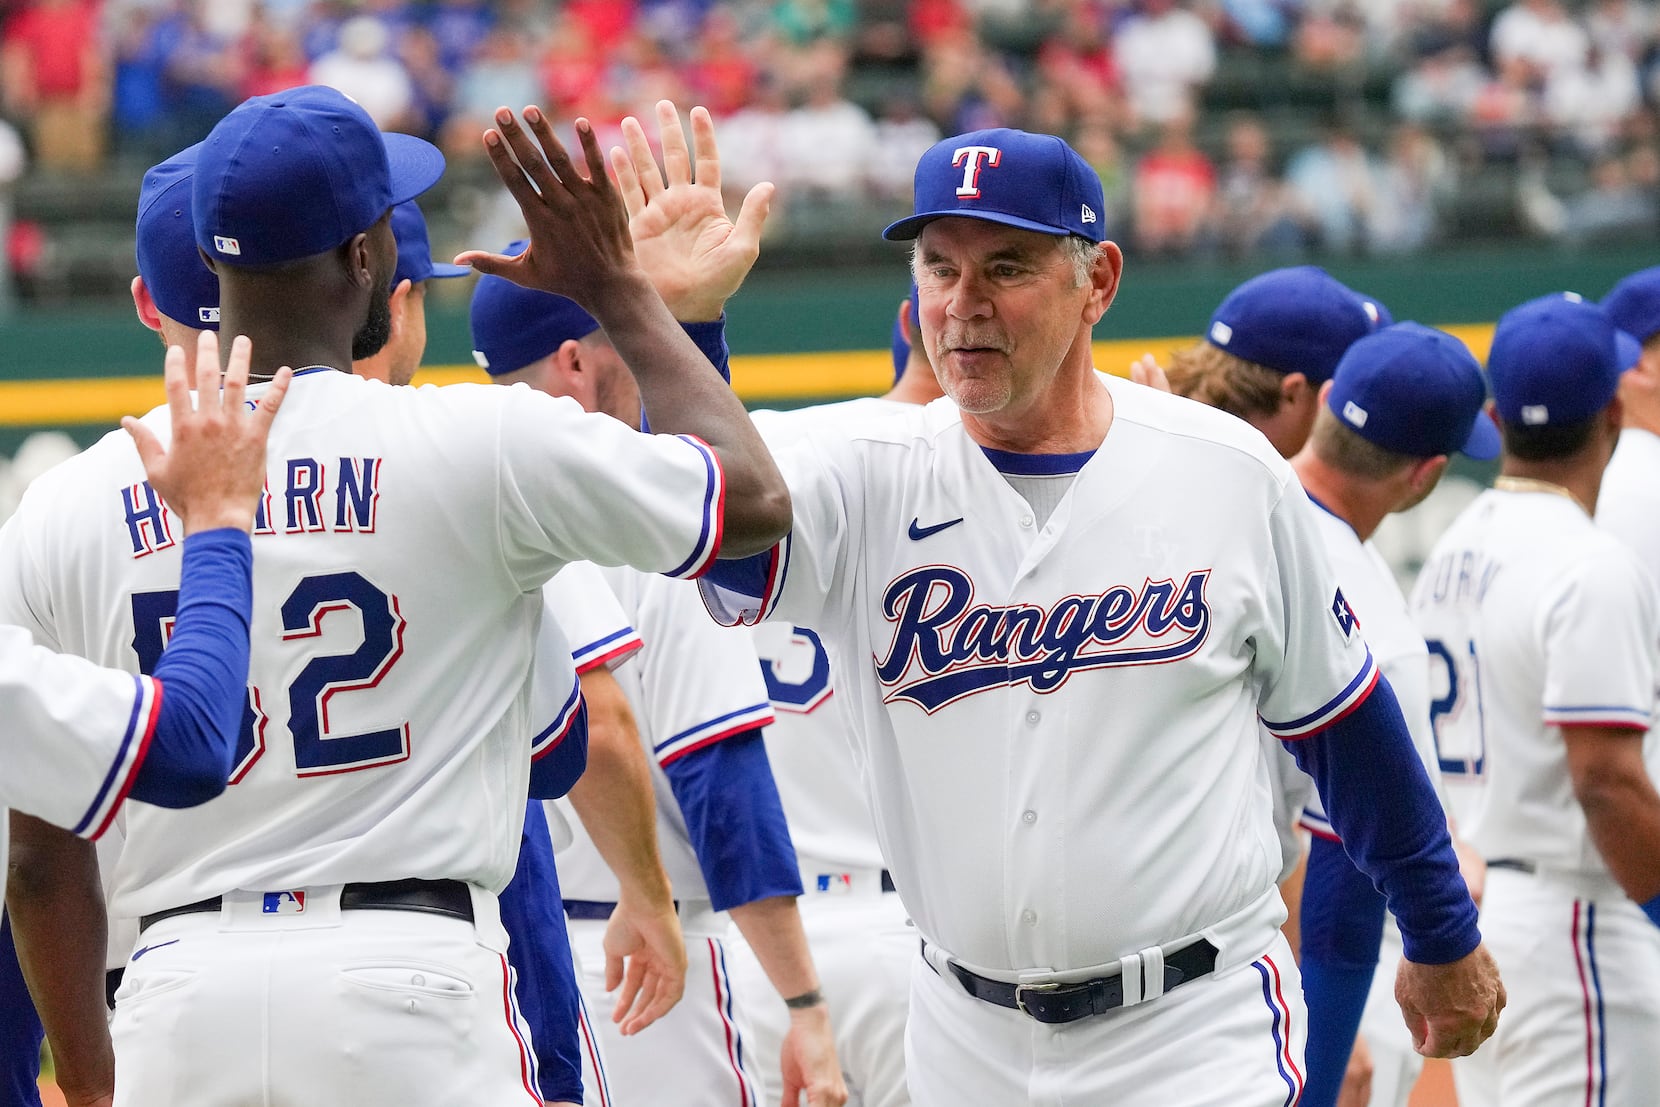 Rangers hire Bruce Bochy as new manager after disappointing season 